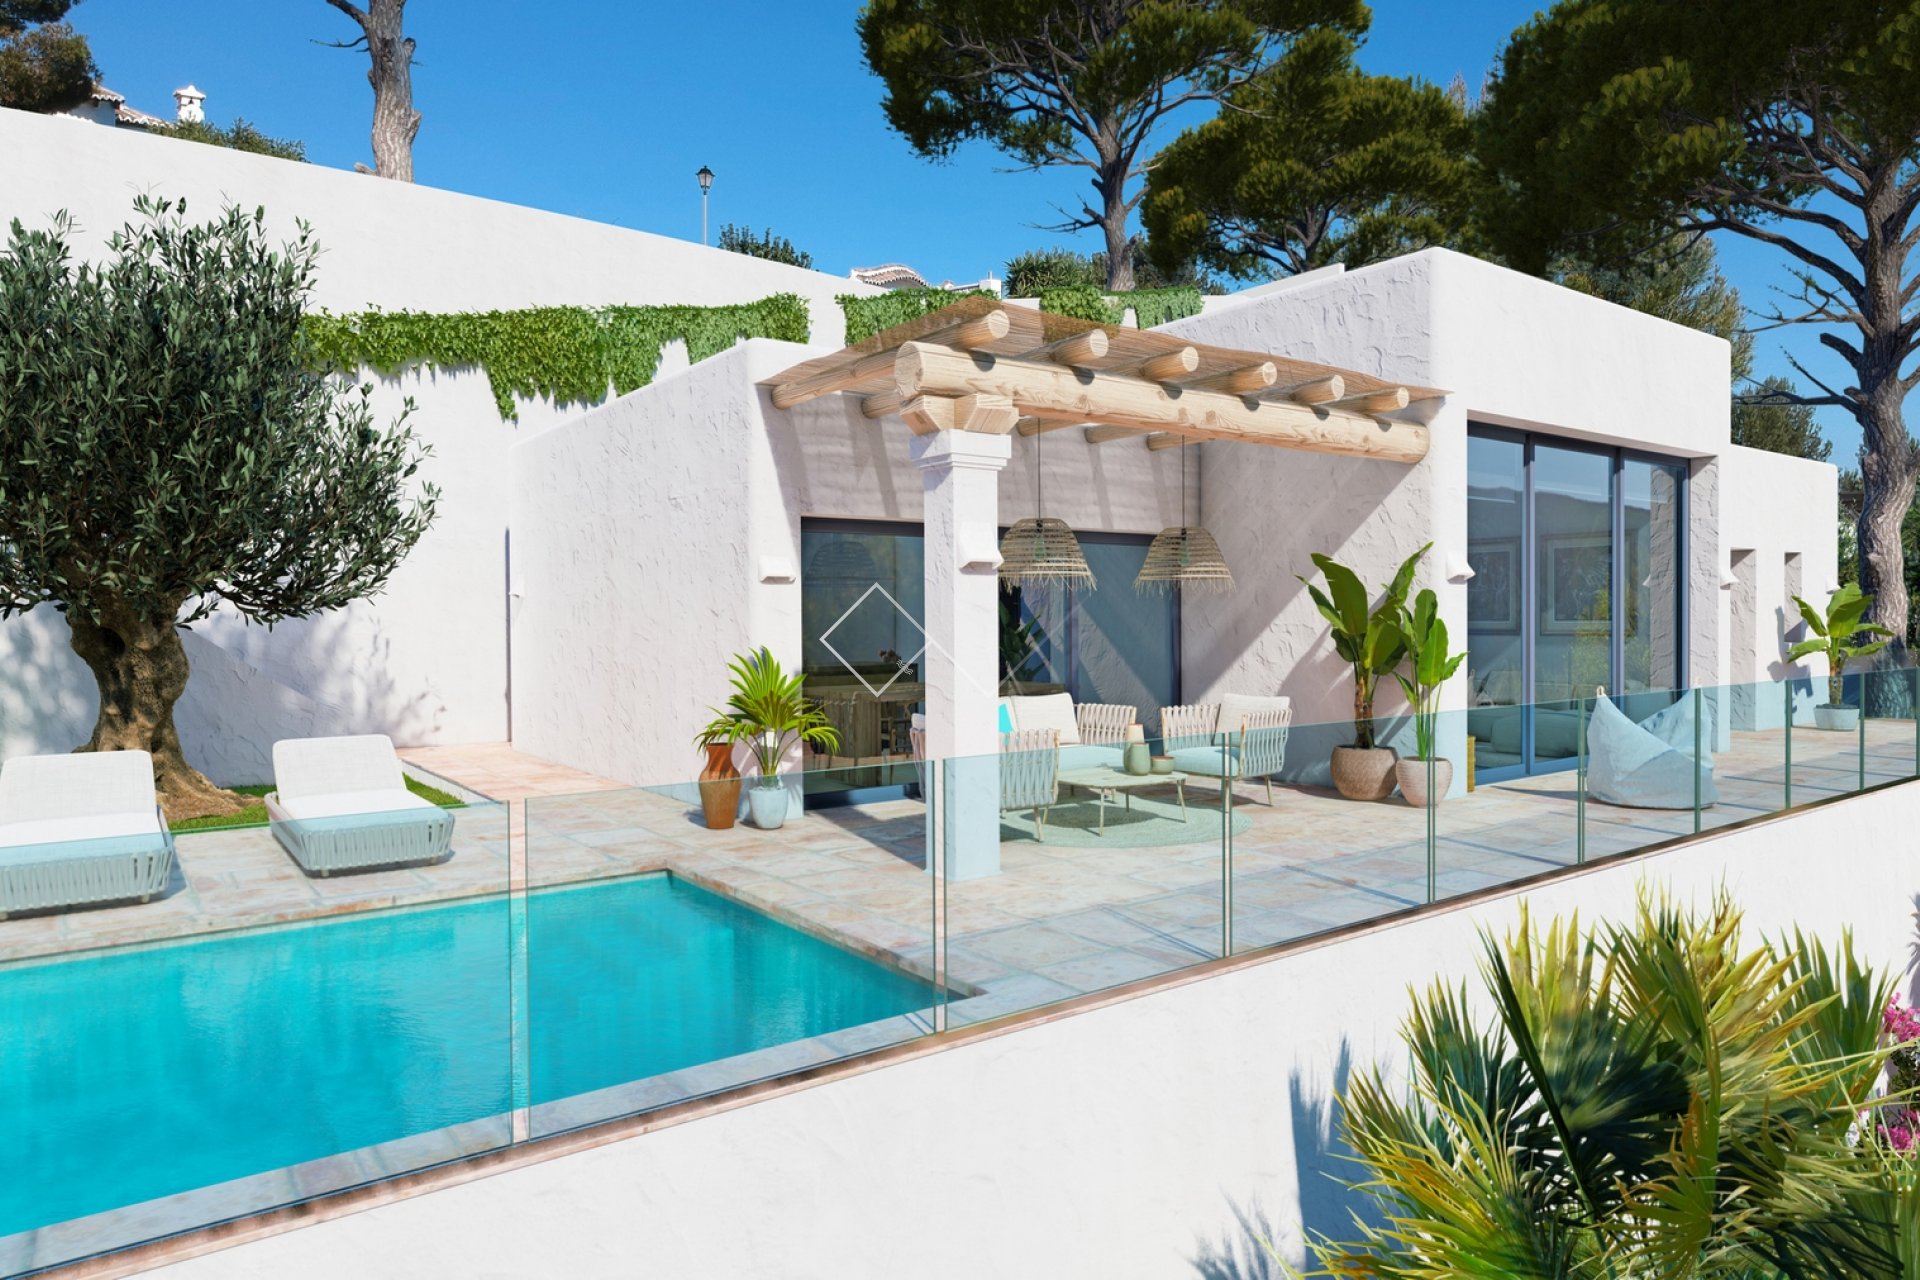 New villa for sale in Pedreguer, Ibiza-style